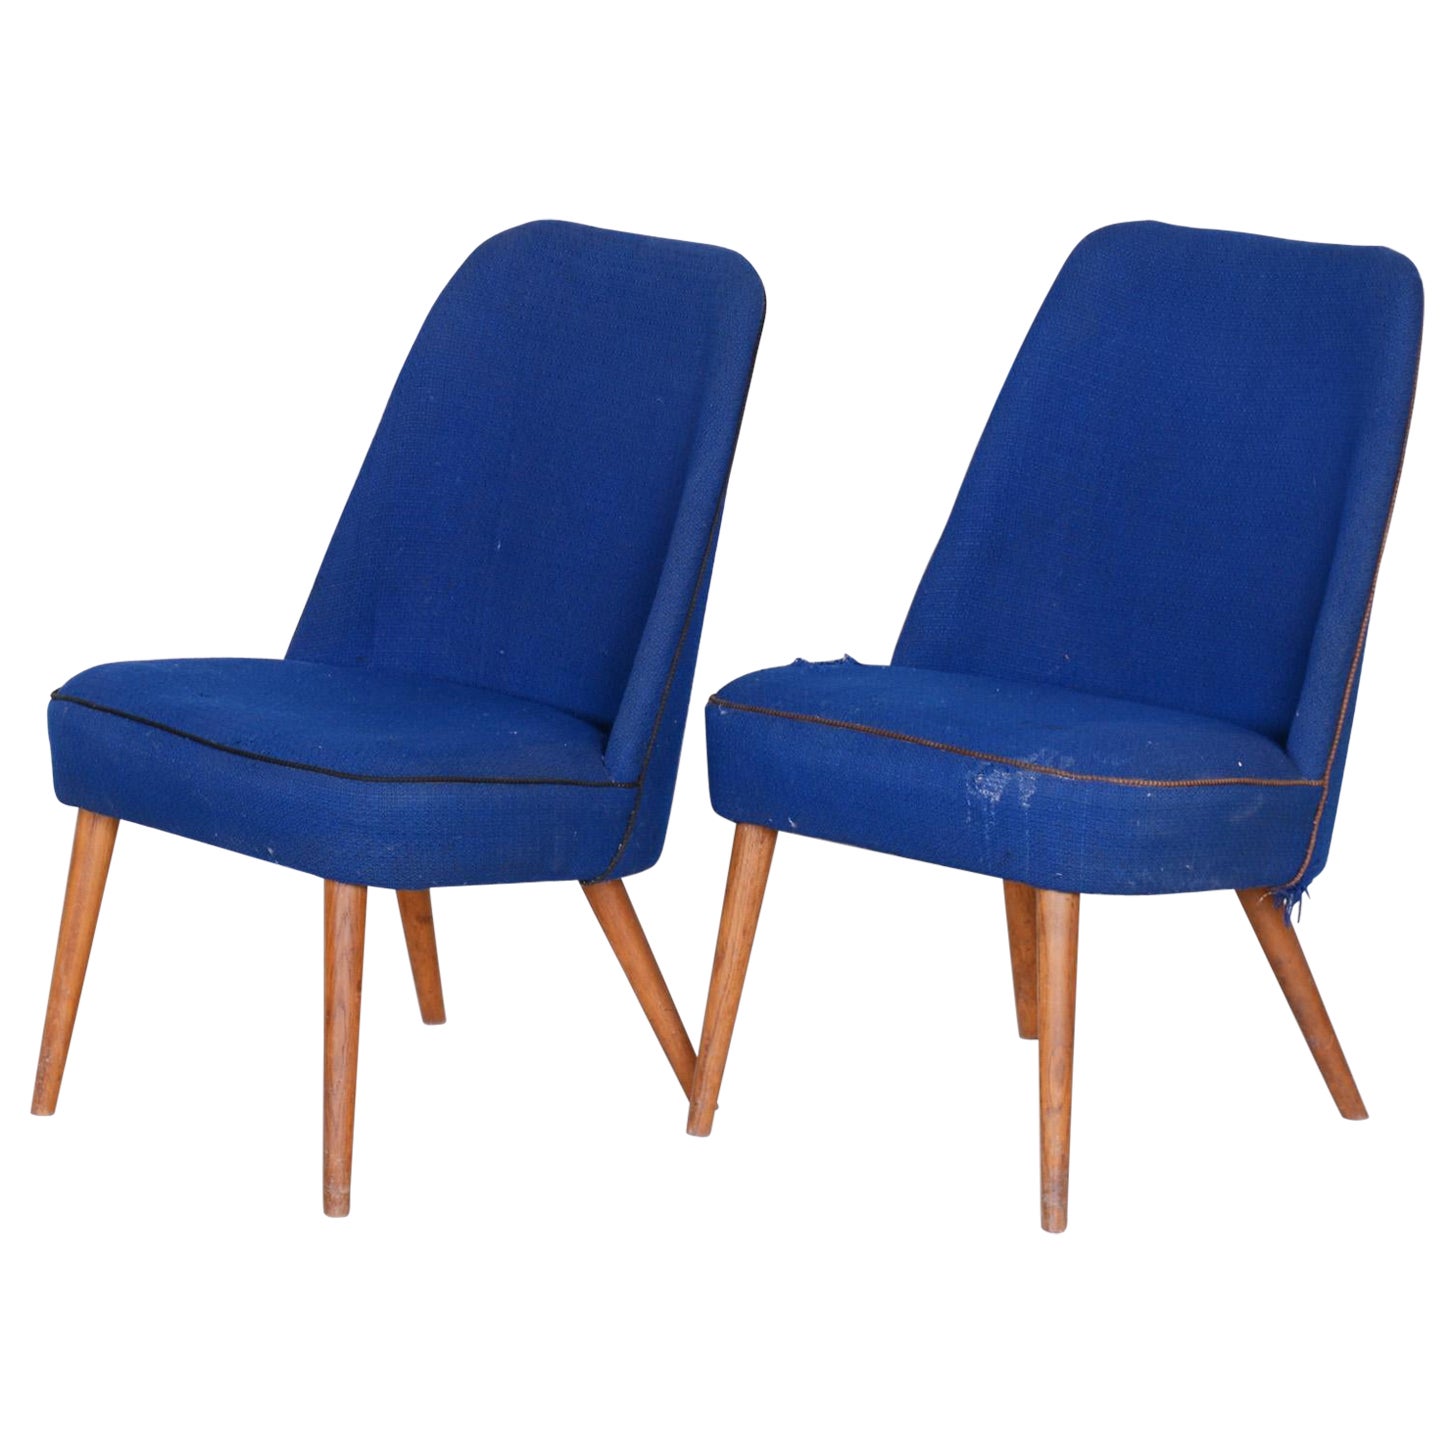 Set of 2 Blue Mid Century Armchairs, Made in 1950s Czechia. Ash, Original For Sale